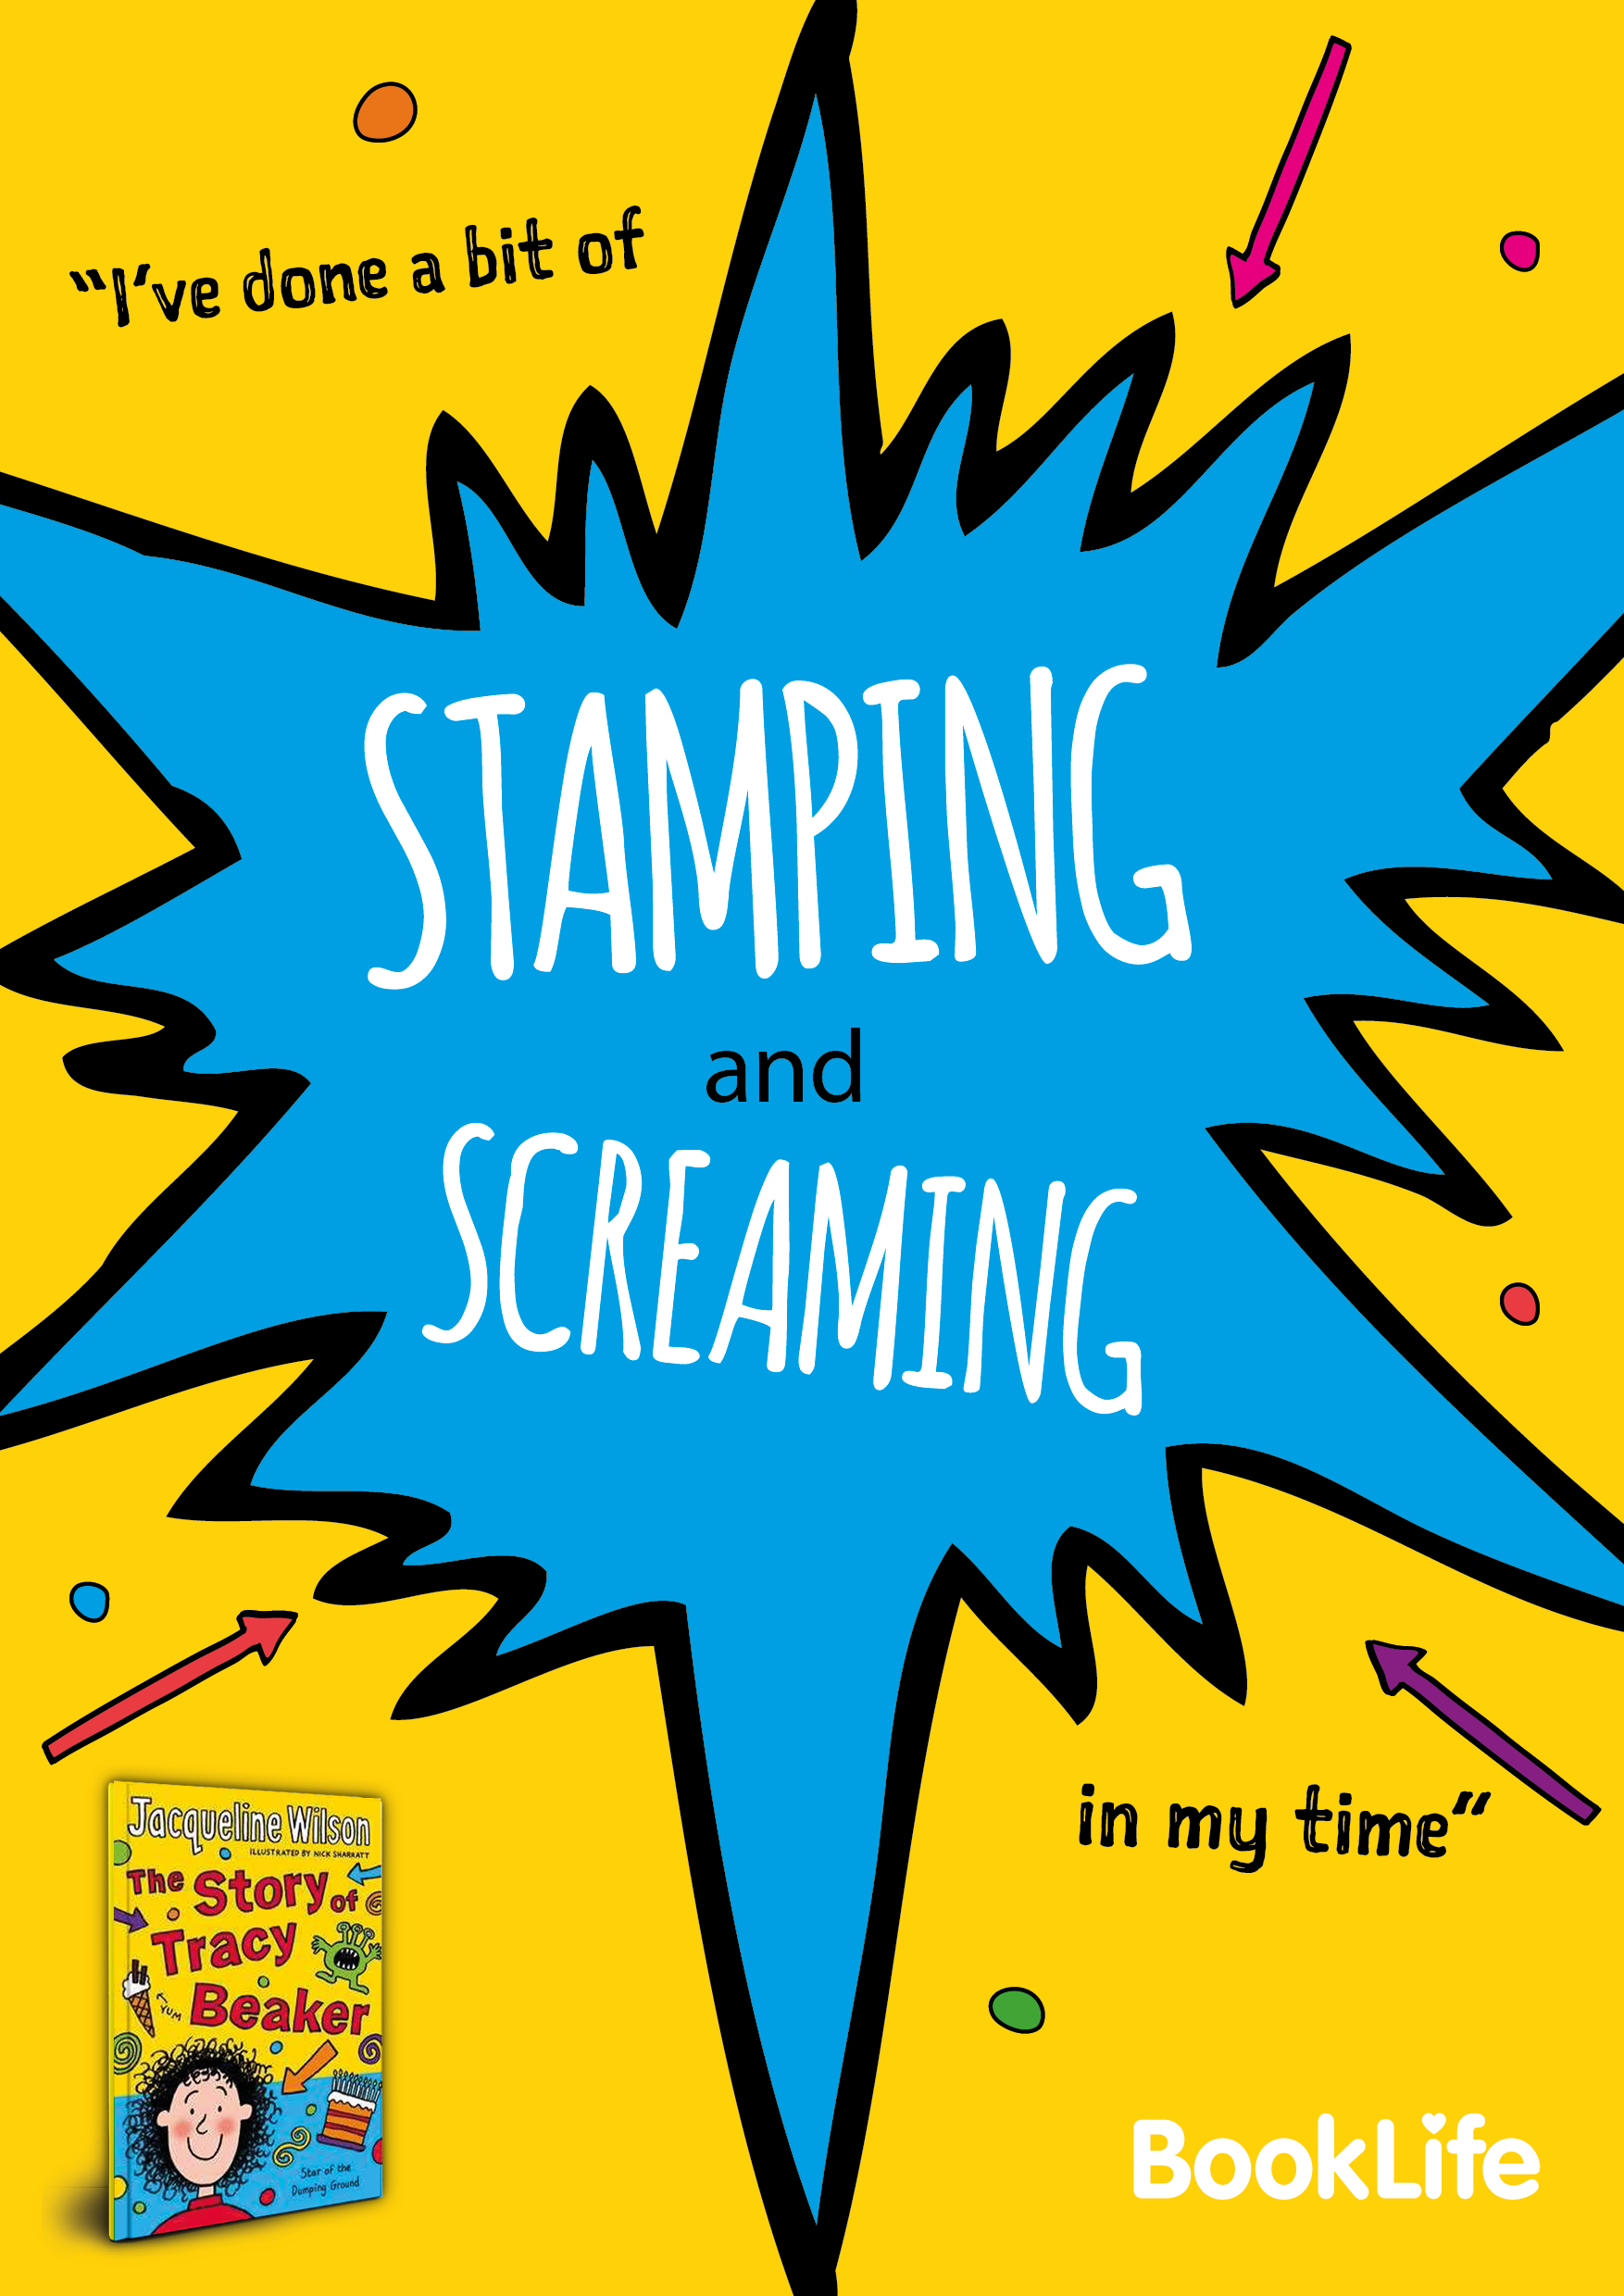 Free Jacqueline Wilson "I've done a bit of stamping..." Poster by BookLife